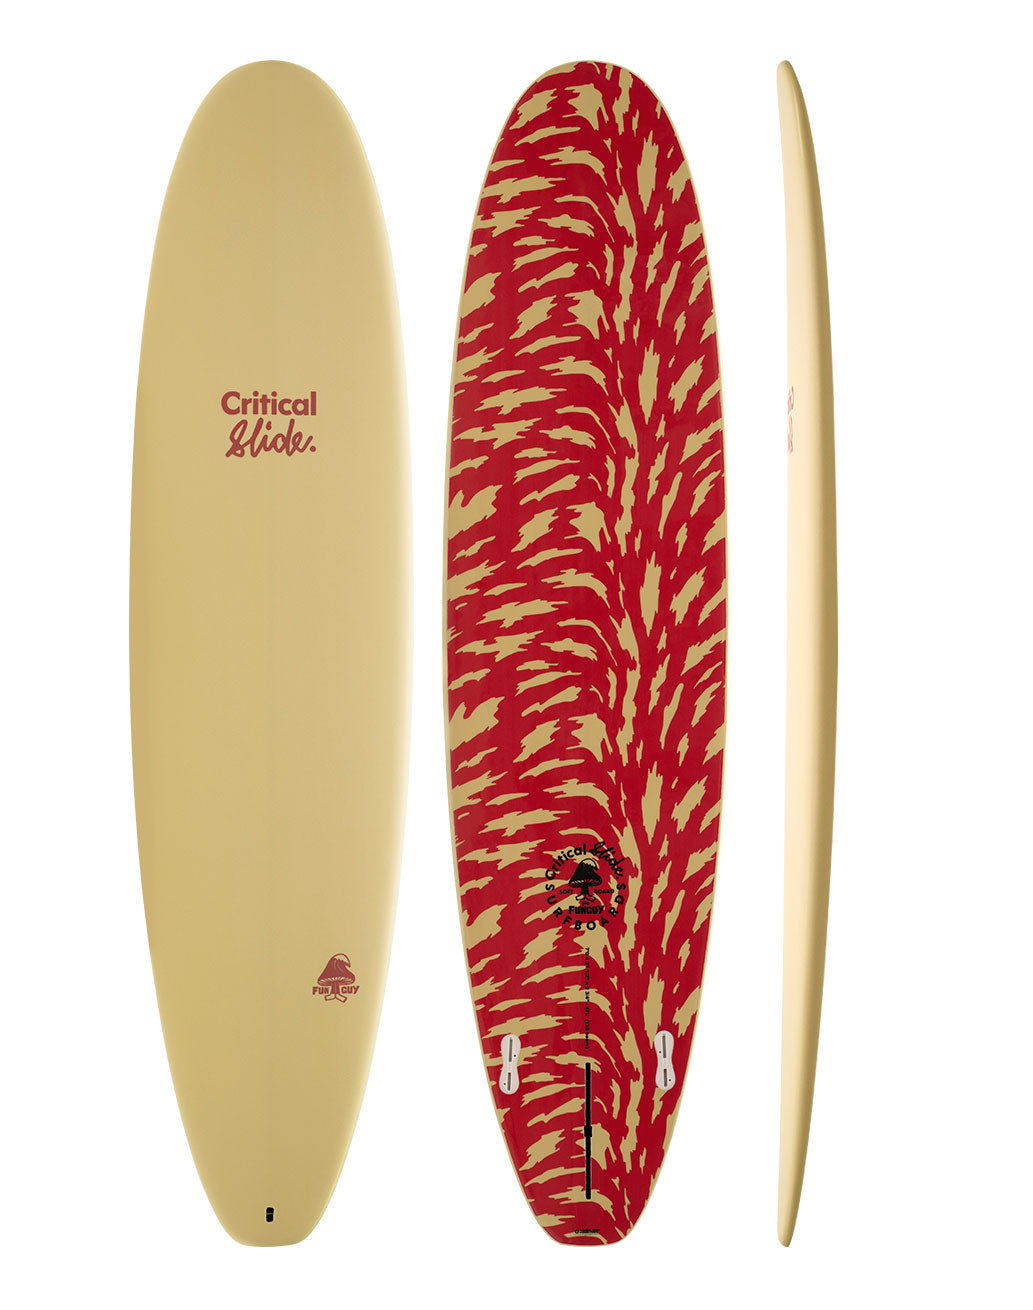 The Critical Slide Society Surfboards - Fun Guy bone and red soft surfboard